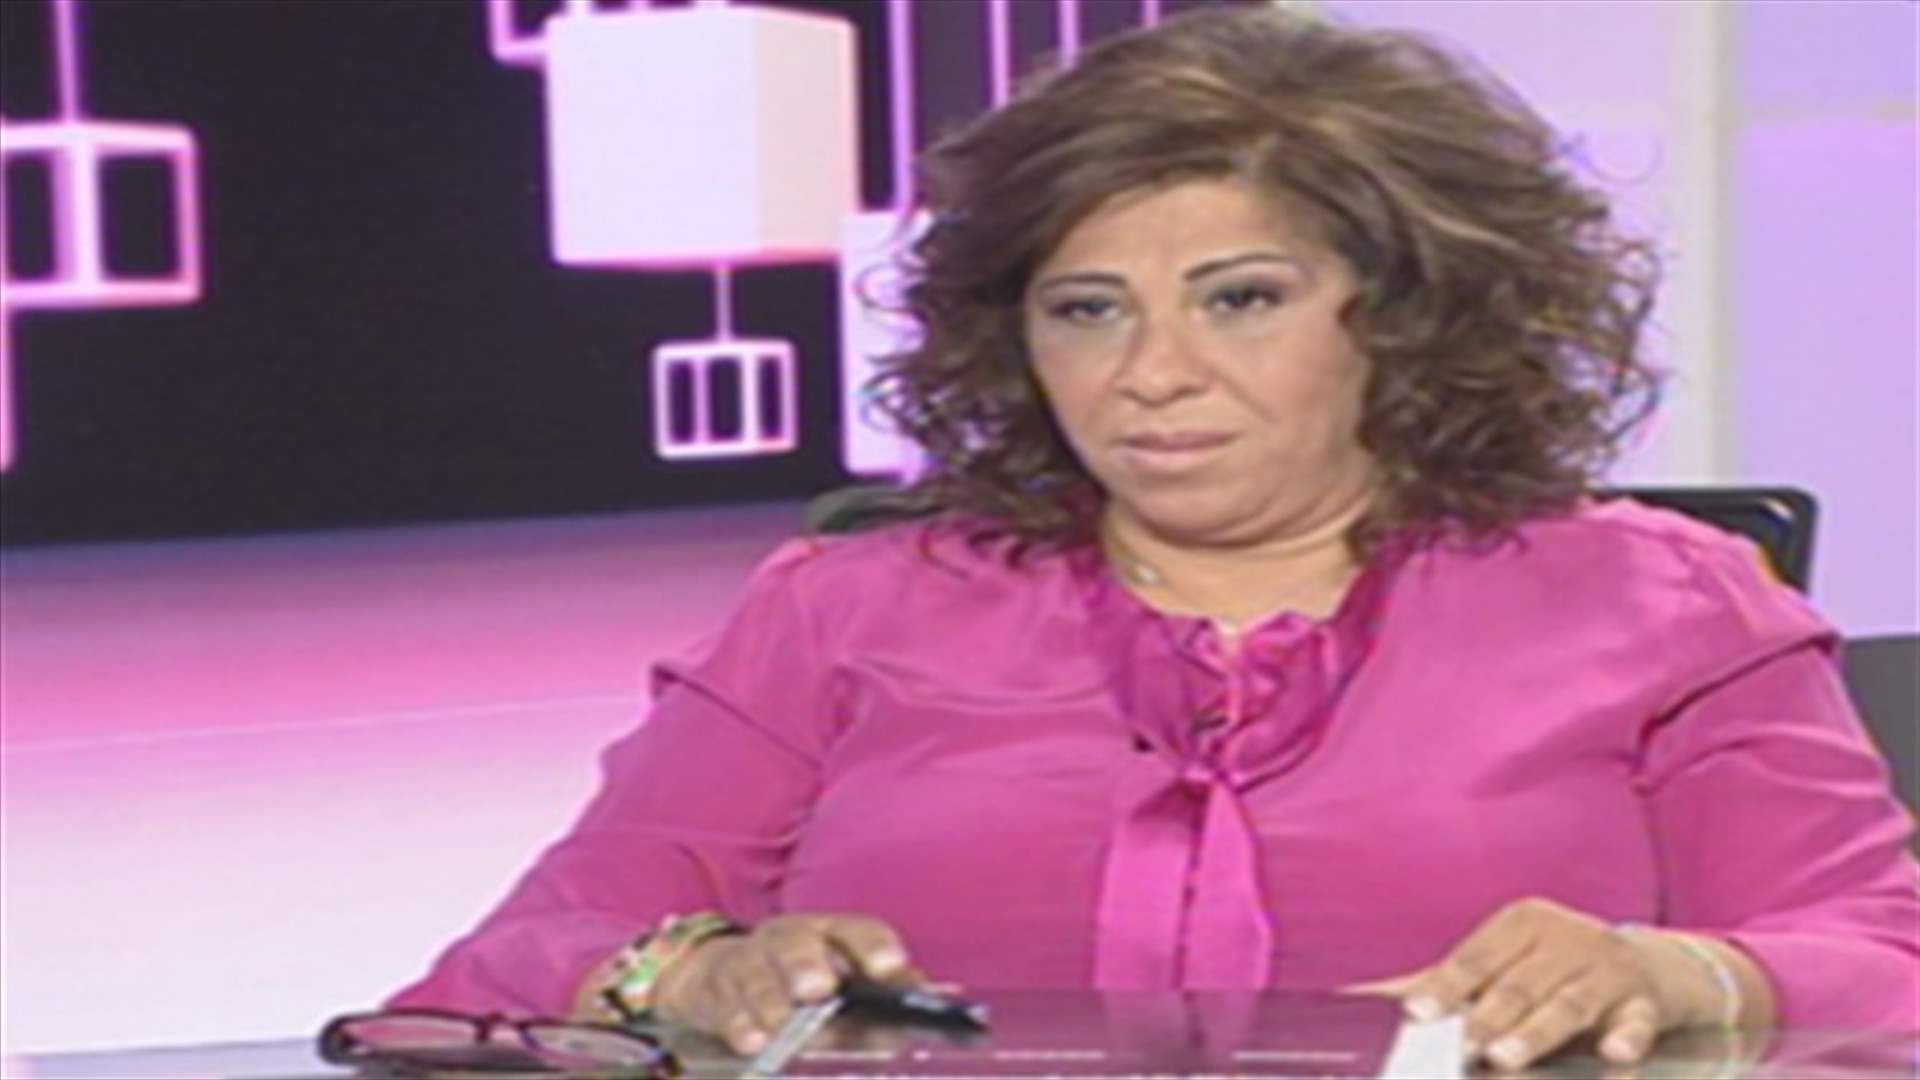 Layla Abdul-Latif appears on “Tareekh Yashhad” TV show, launches series of predictions